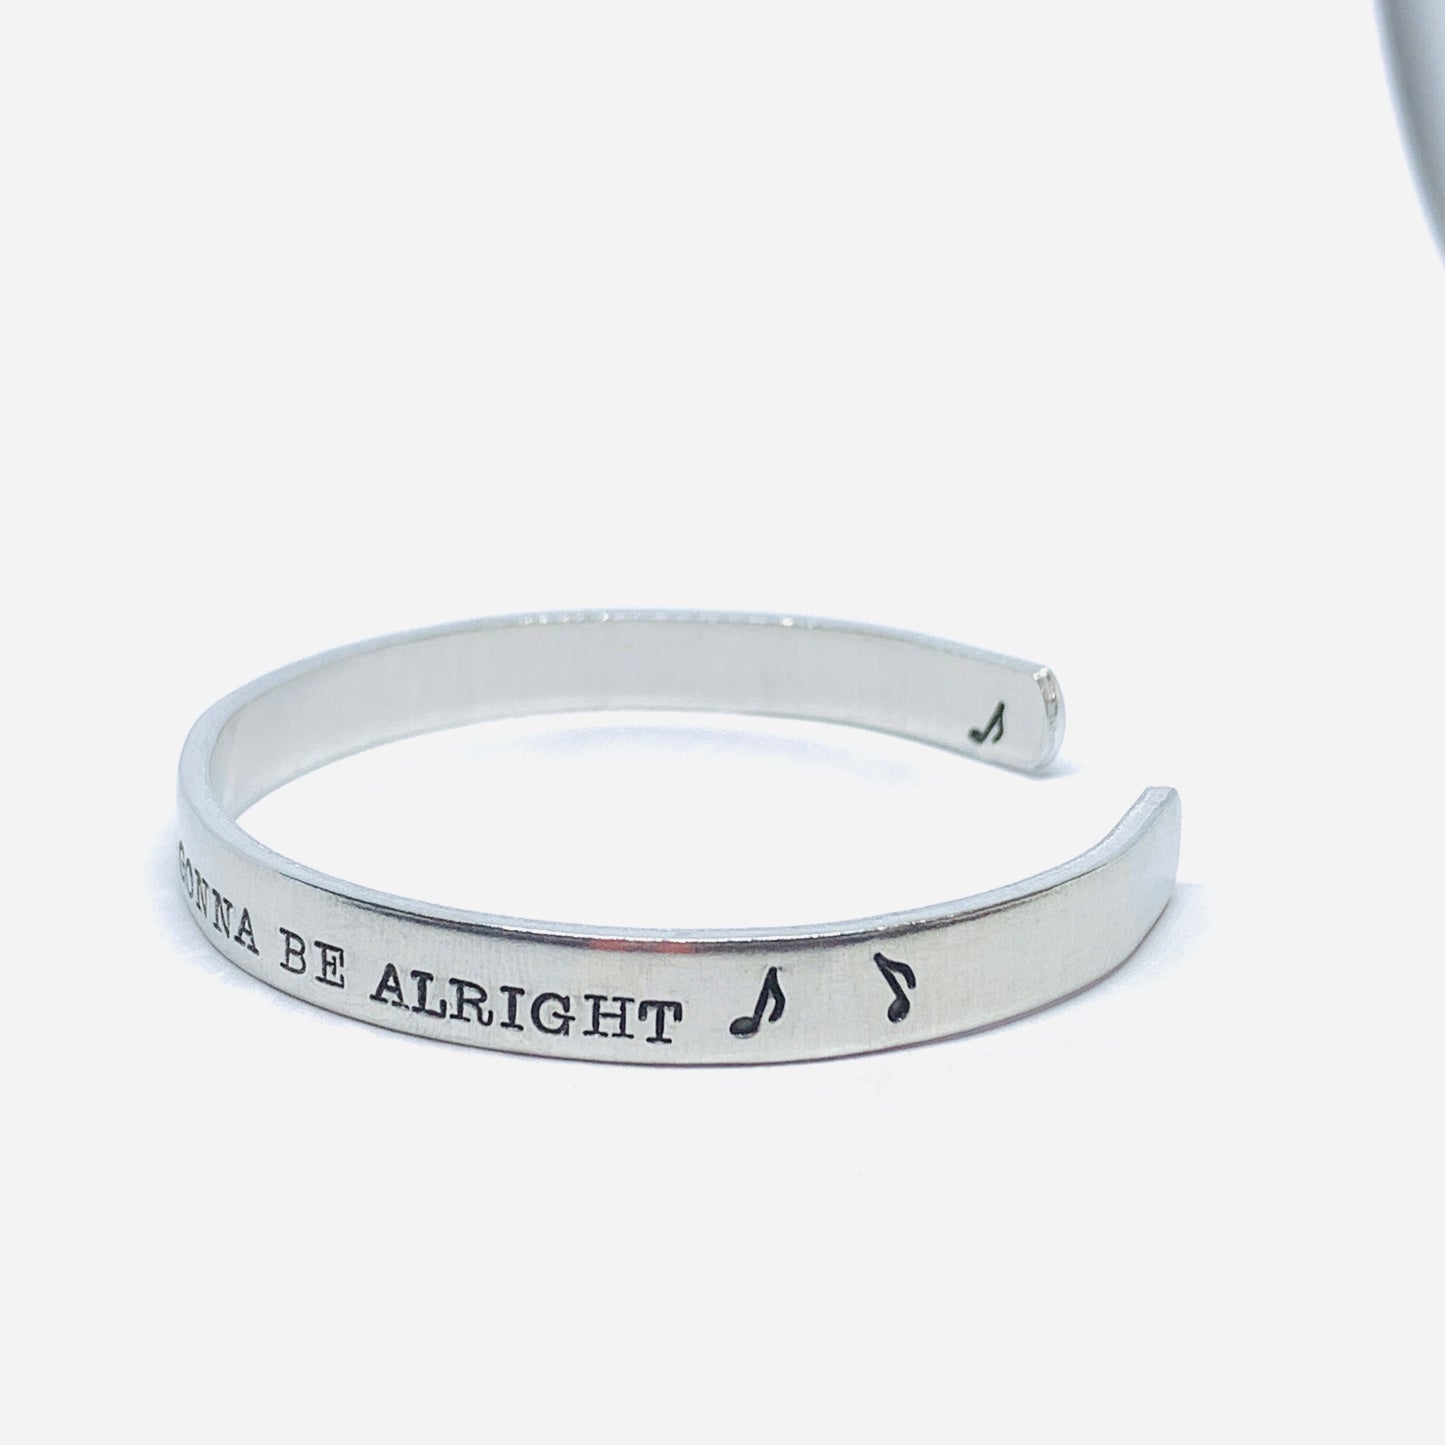 Every little thing gonna be alright - Hand Stamped Cuff Bracelet